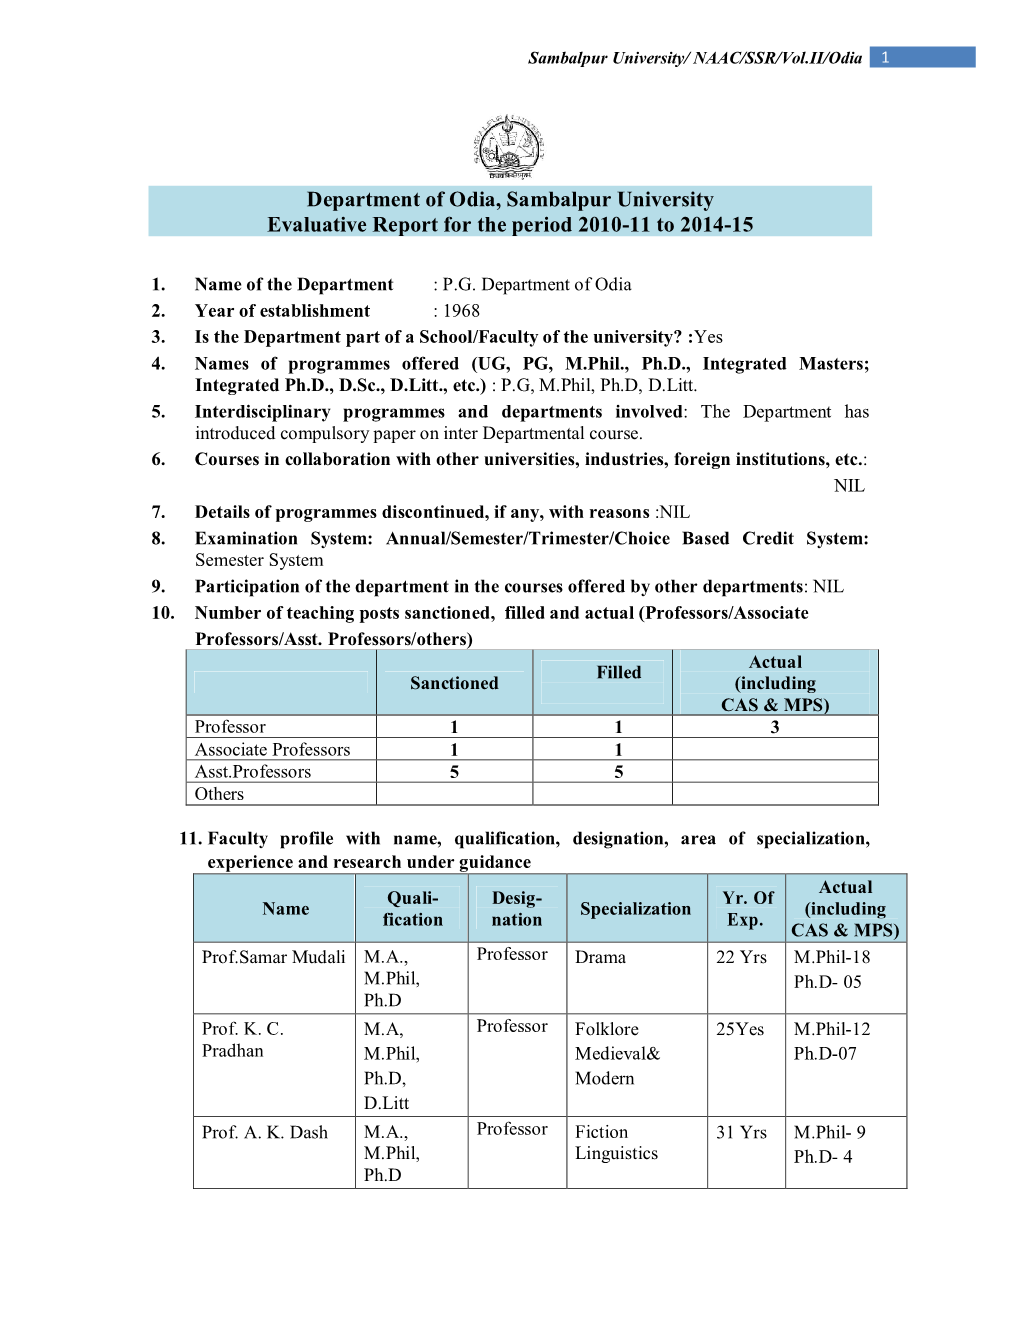 Department of Odia, Sambalpur University Evaluative Report for the Period 2010-11 to 2014-15